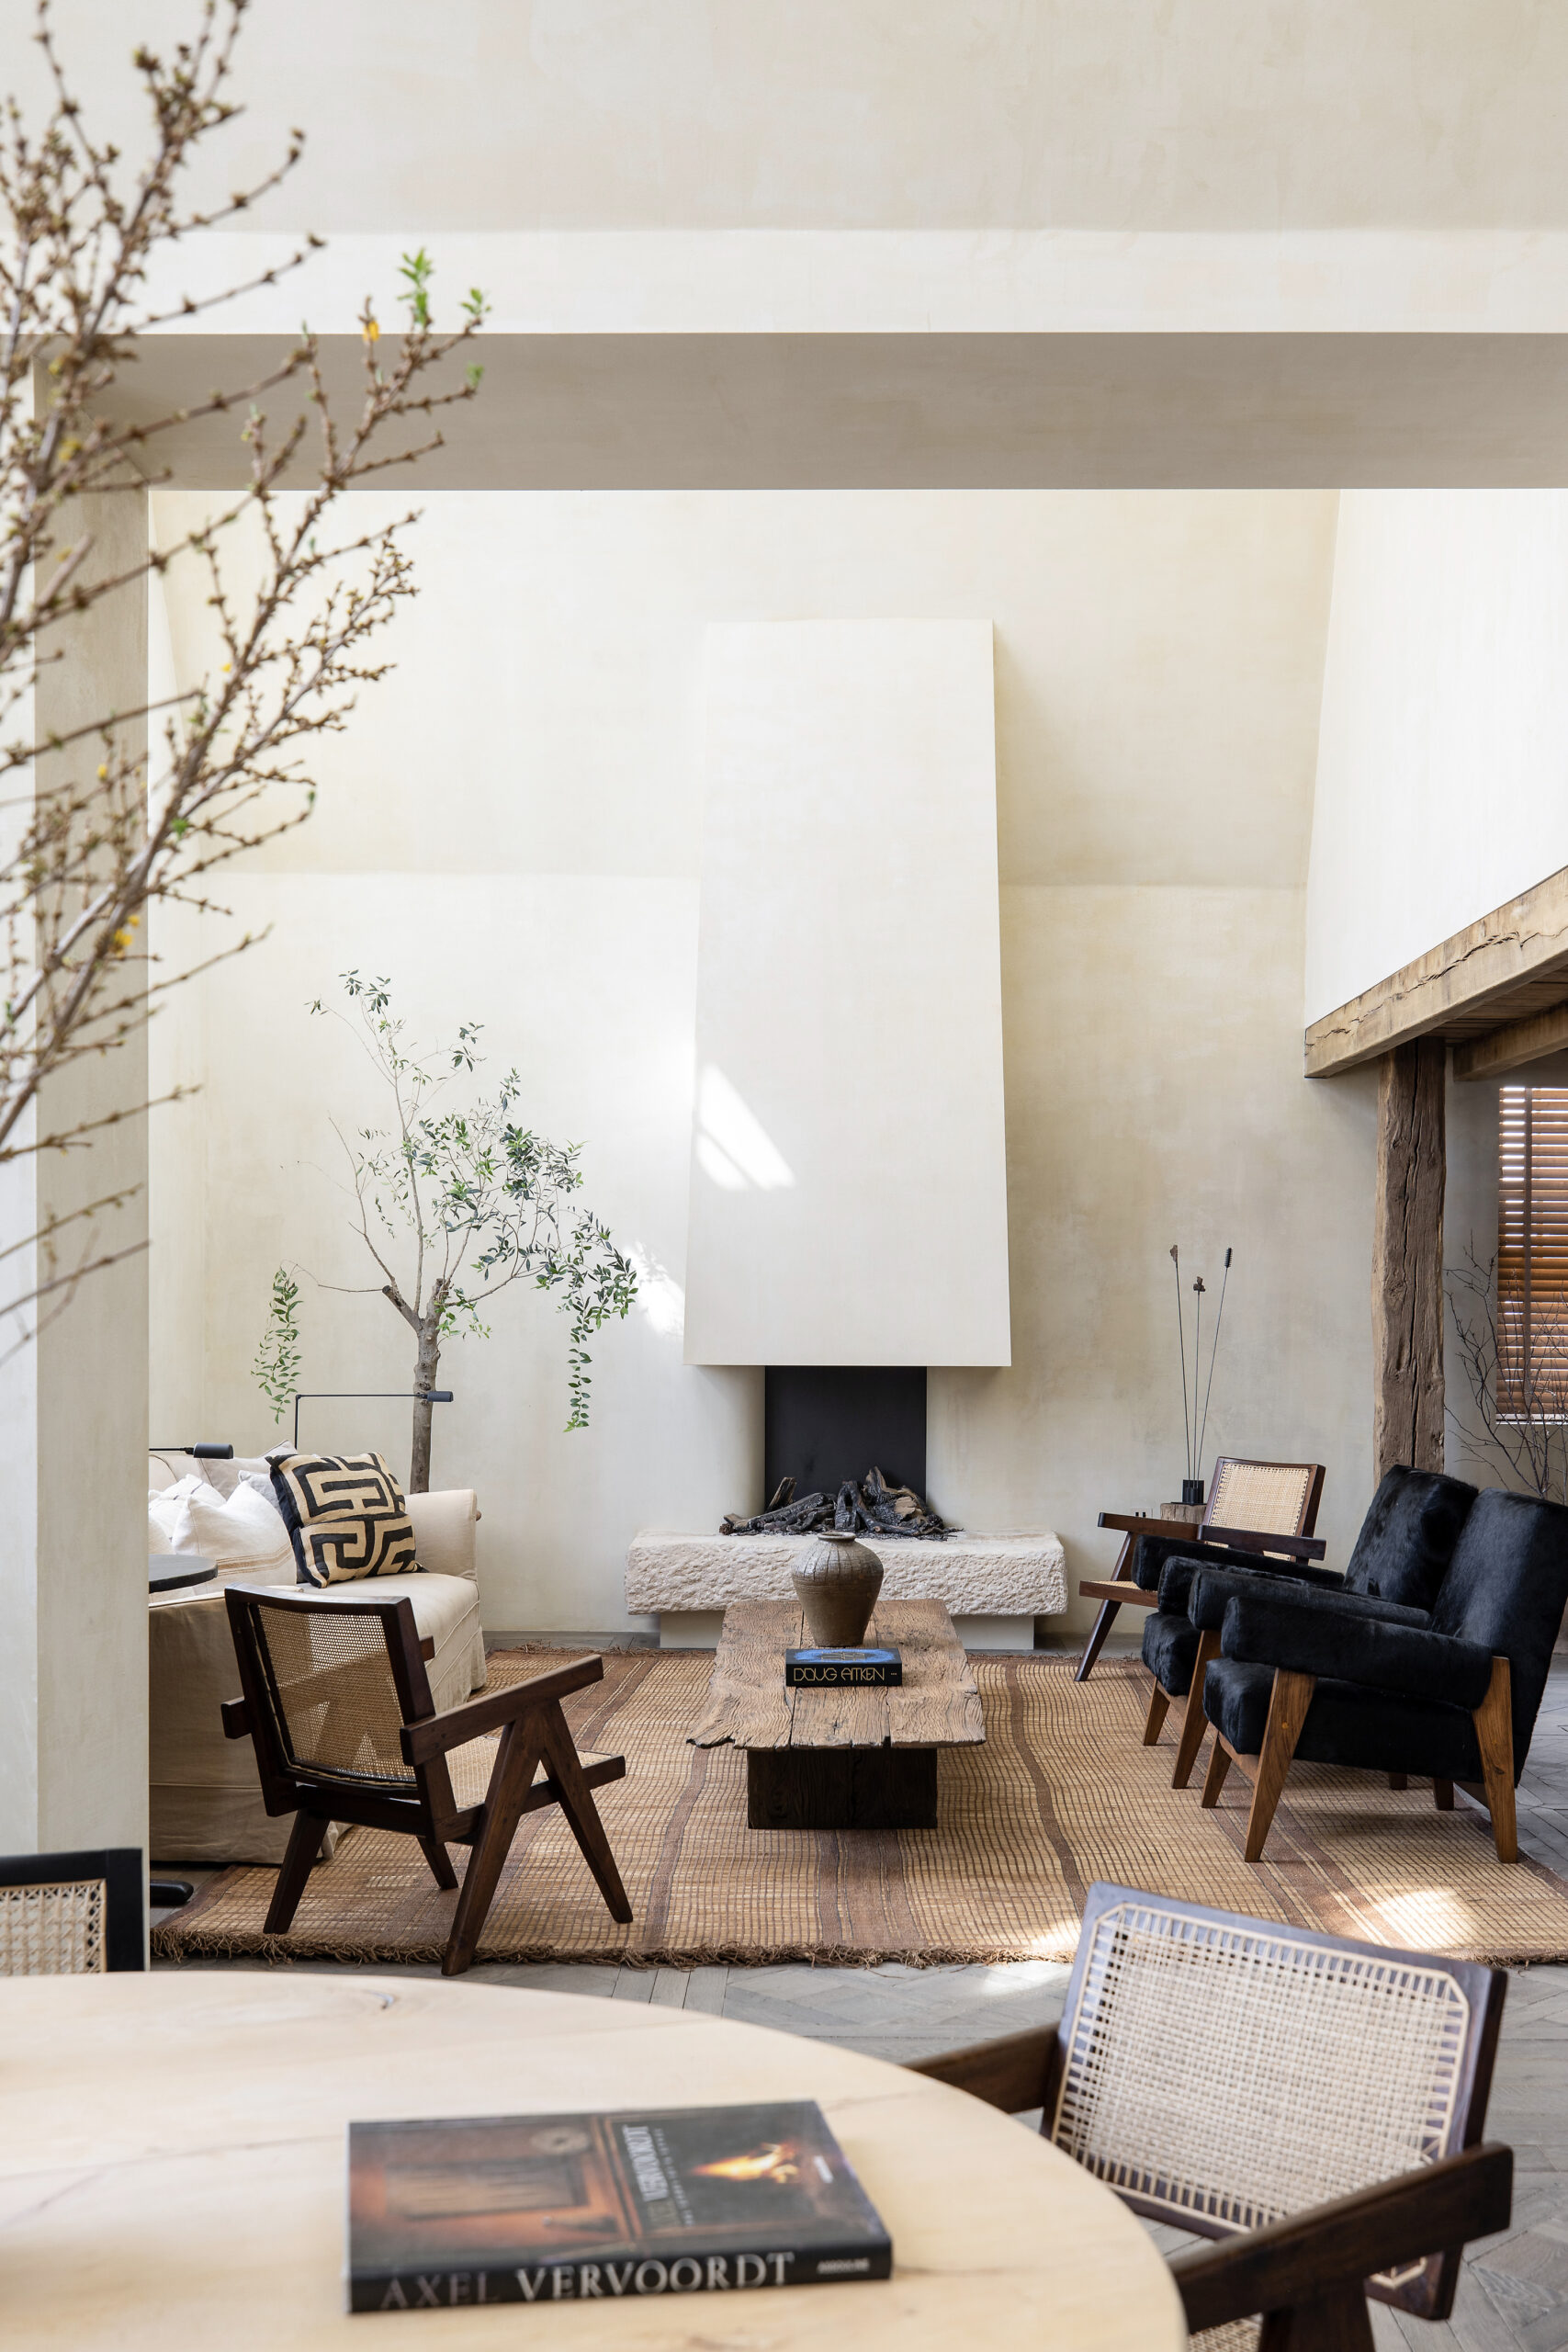 A fireplace grounds the living area of a luxury penthouse for rent in Notting Hill